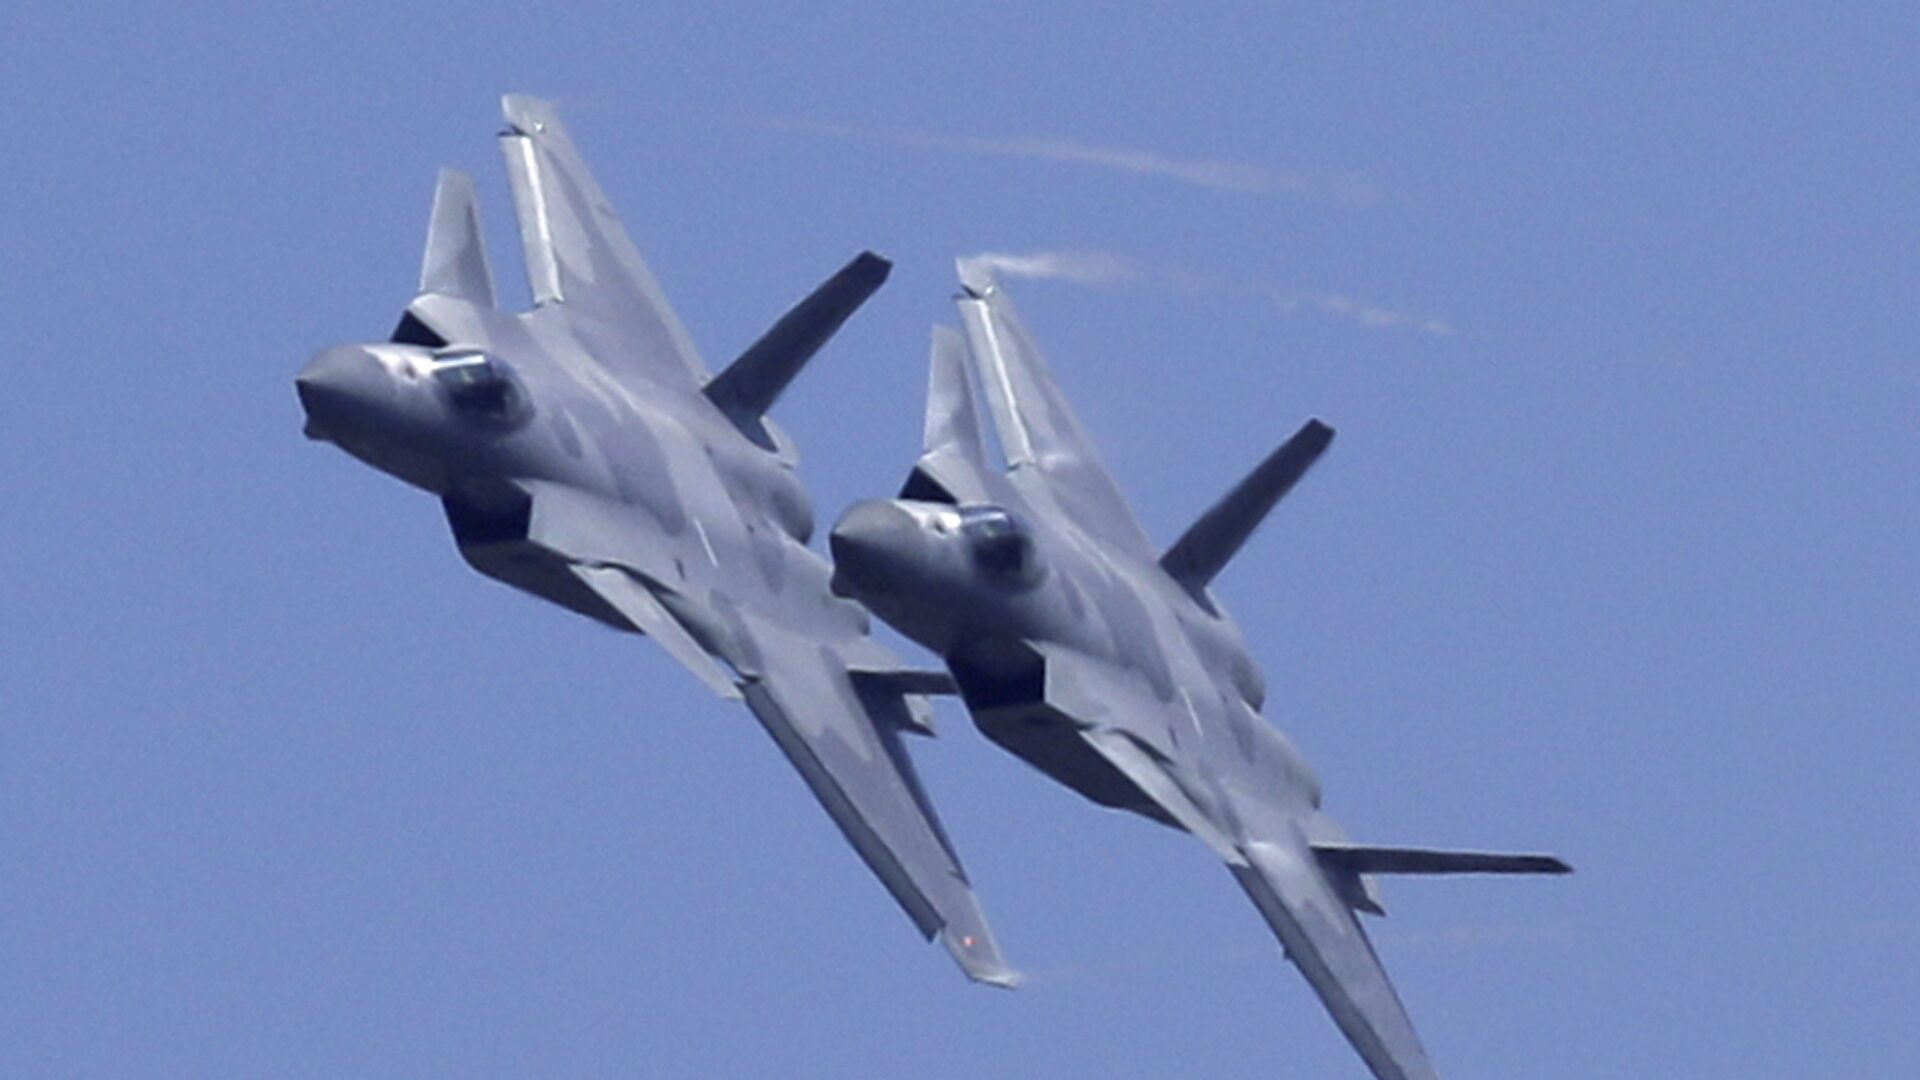 Two J-20 stealth fighter jets of the Chinese People's Liberation Army (PLA) Air Force performs during the 12th China International Aviation and Aerospace Exhibition, also known as Airshow China 2018, Tuesday, Nov. 6, 2018, in Zhuhai city, south China's Guangdong province - Sputnik International, 1920, 25.06.2021